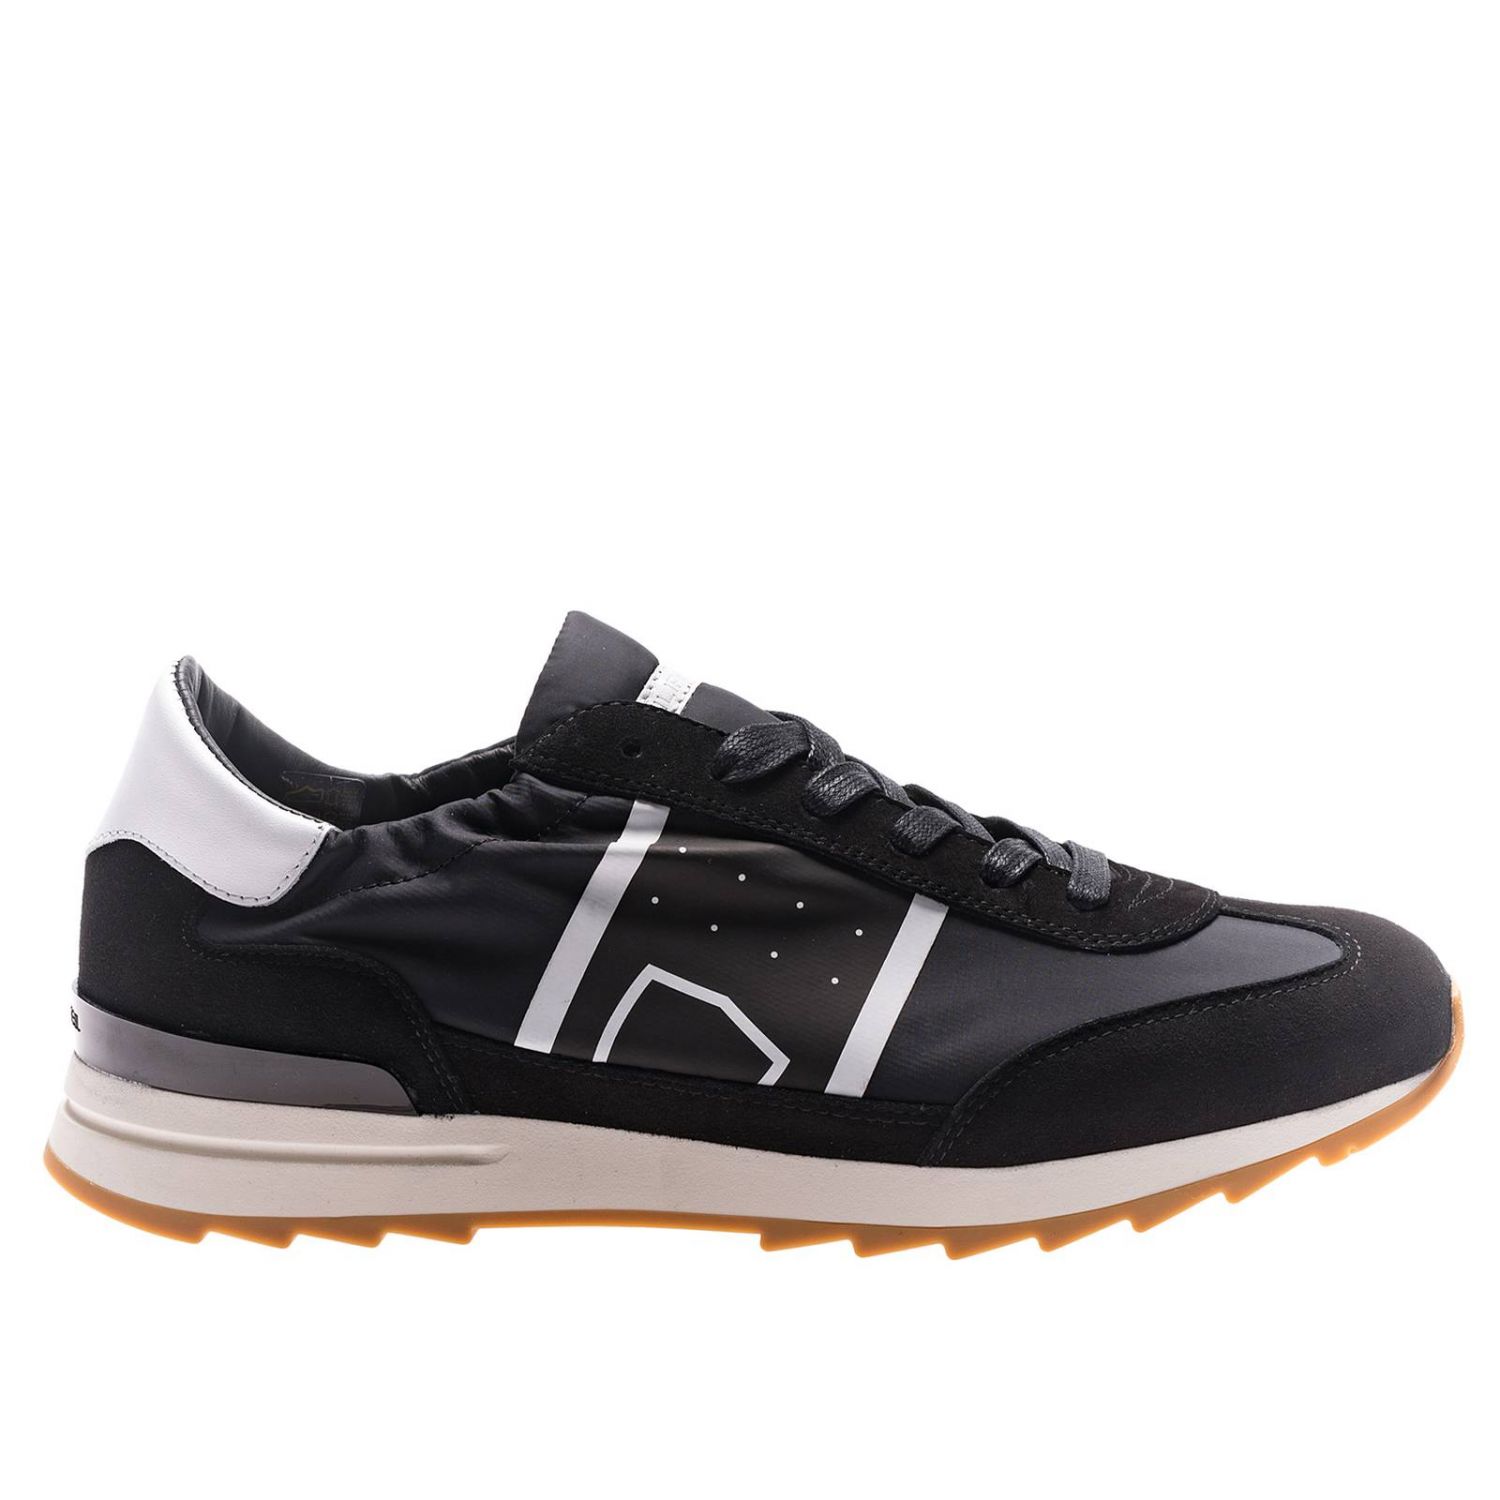 Philippe Model Outlet: sneakers for man - Black | Philippe Model ...